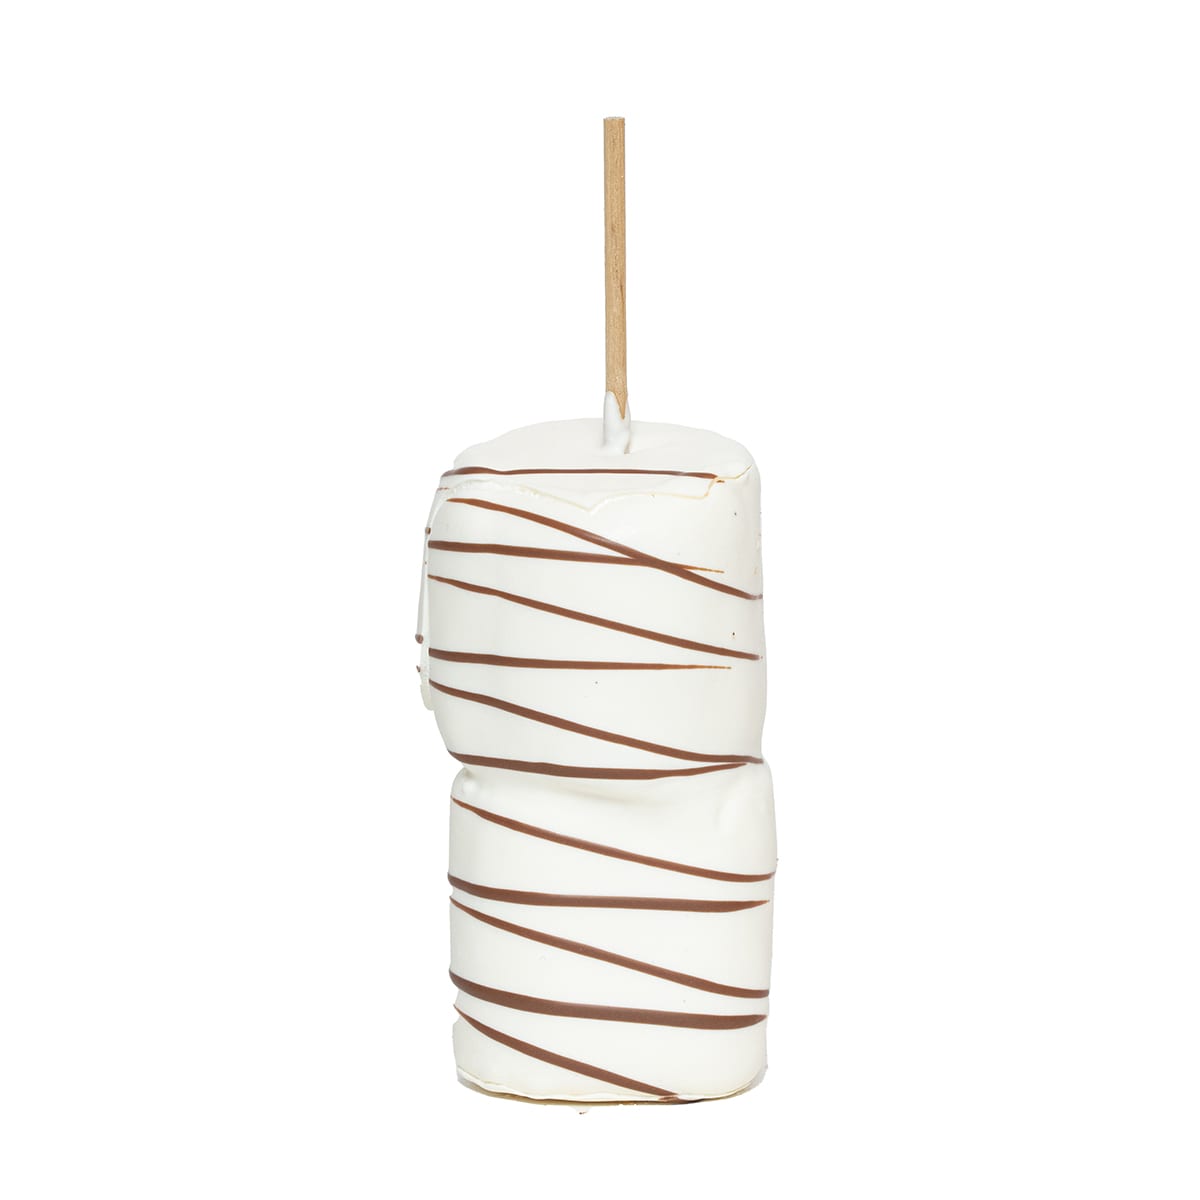 Marshmallow Dipped In White Chocolate with Milk Chocolate Drizzle